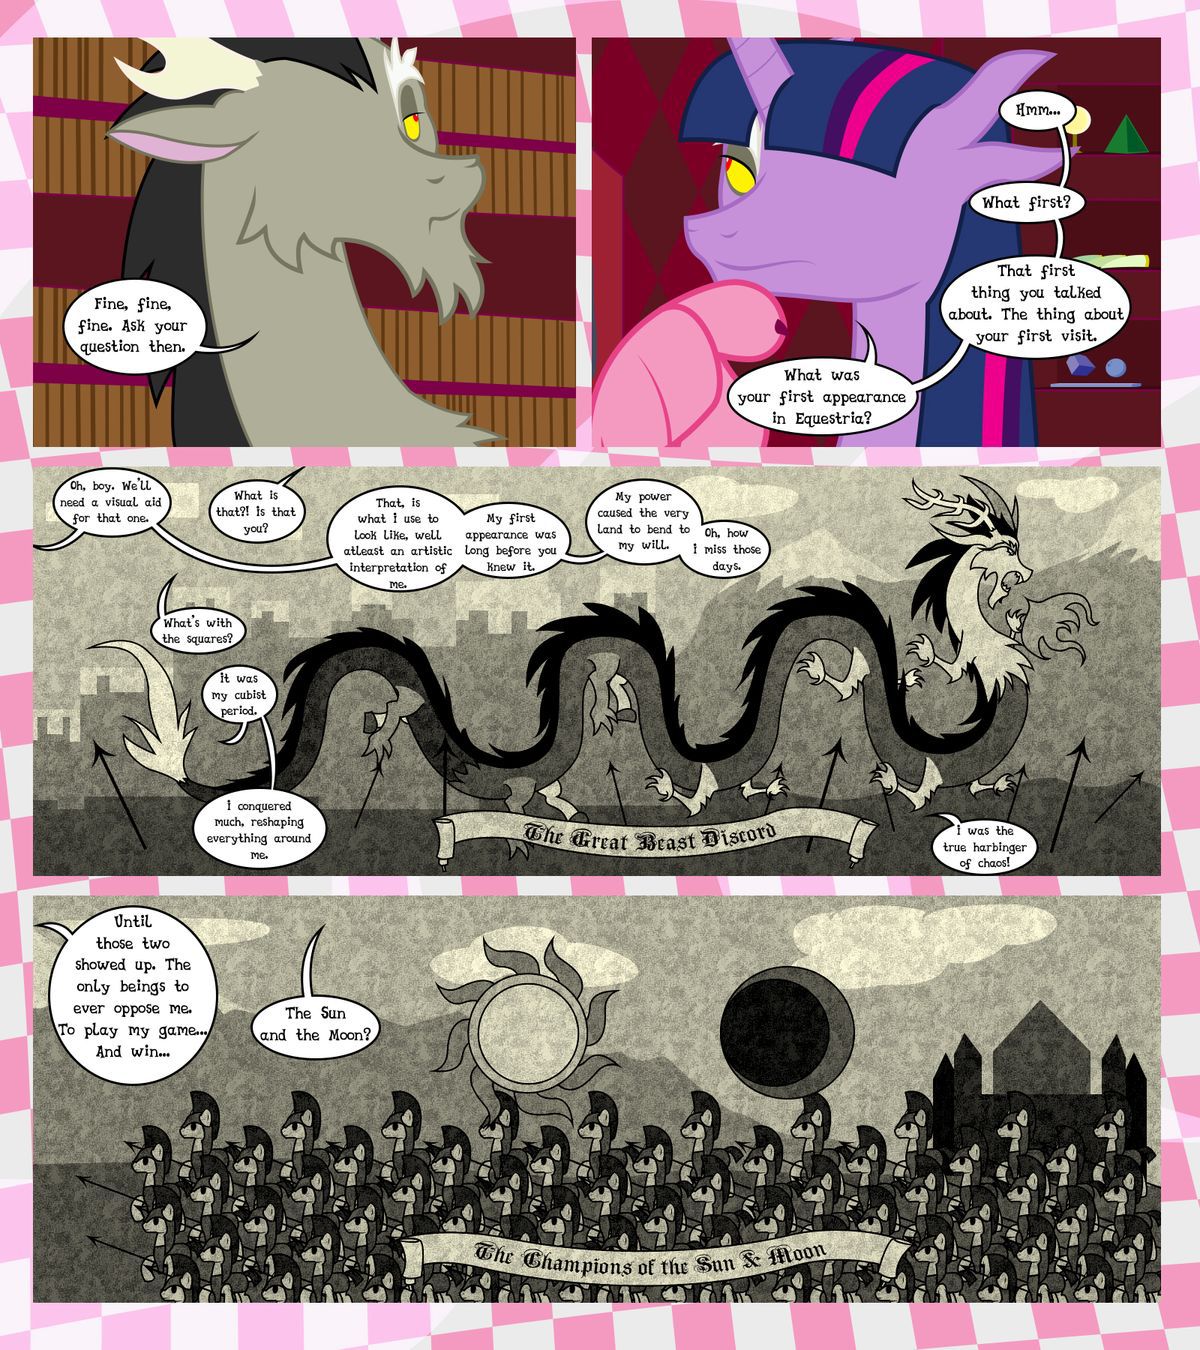 [GatesMcCloud] Cutie Mark Crusaders 10k: Chapter 3 - The Lost (My Little Pony: Friendship is Magic) [English] [Ongoing] 28